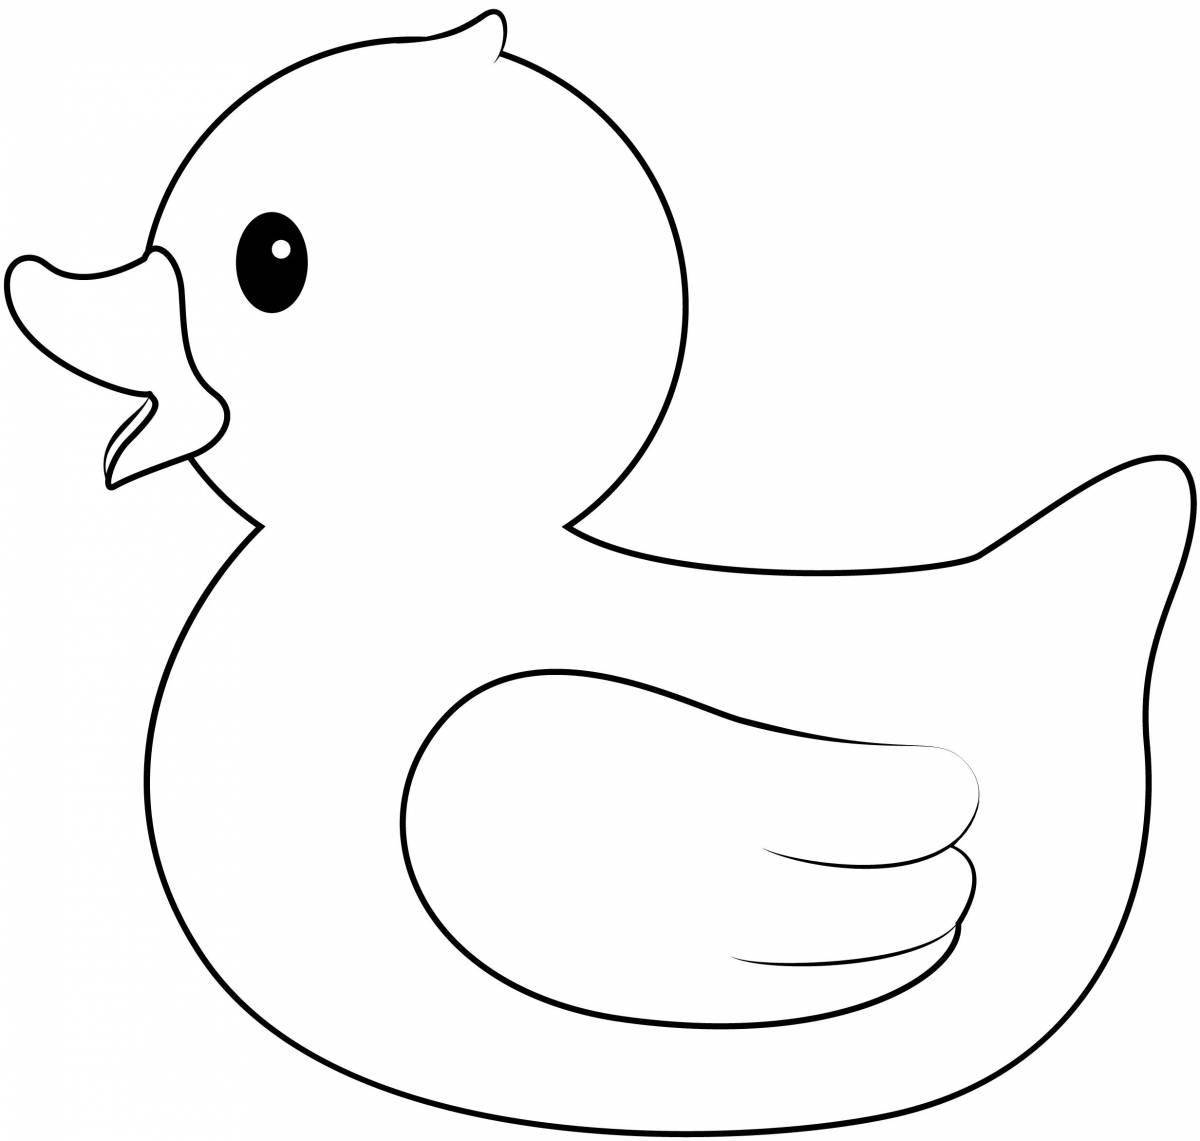 Smiling rubber duck coloring page